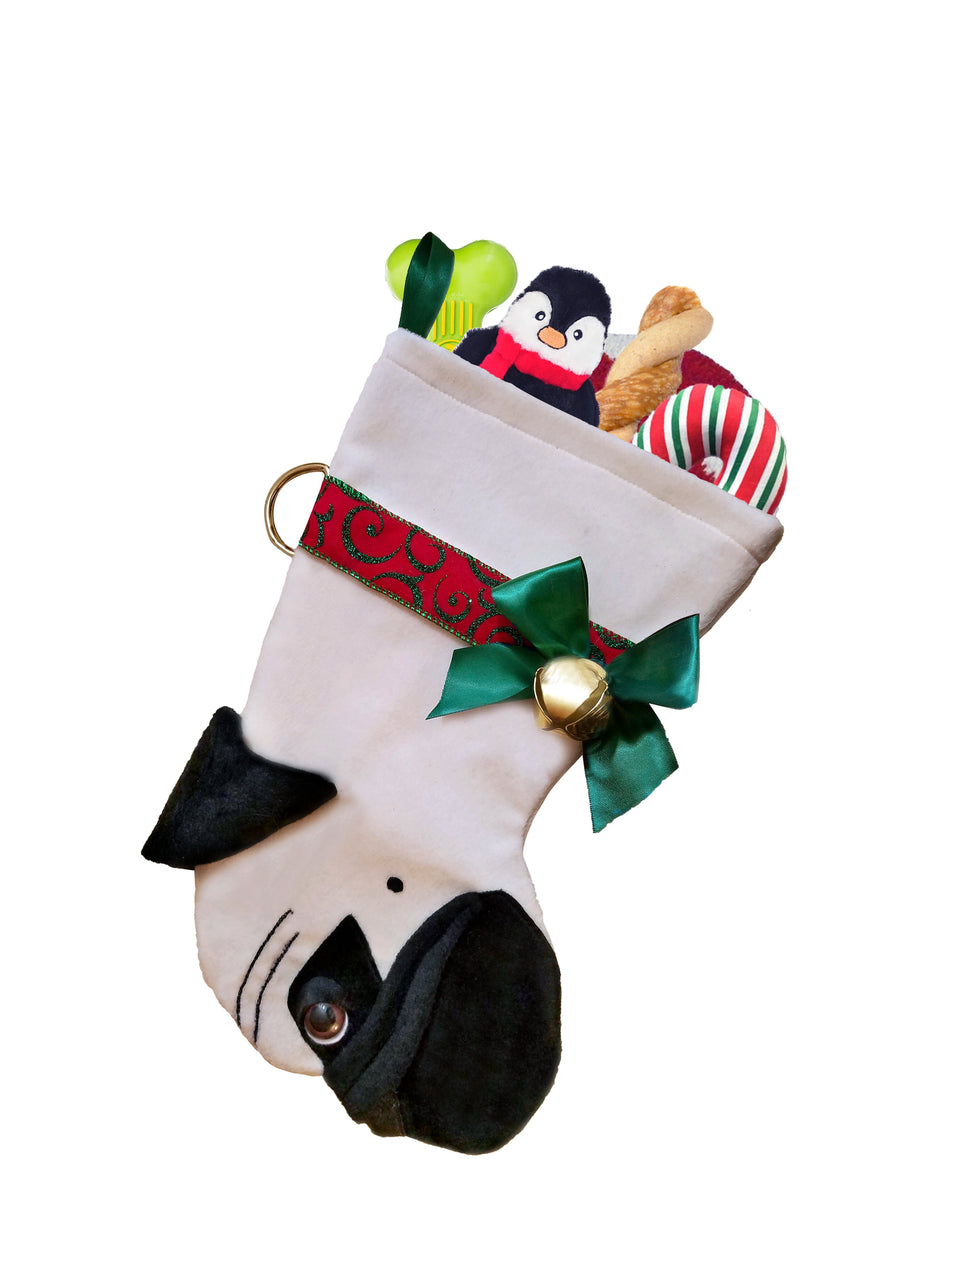 This Pug shaped dog Christmas stocking is the perfect gift for stuffing toys and treats into to spoil your fur baby for Christmas, or whatever holiday you celebrate!